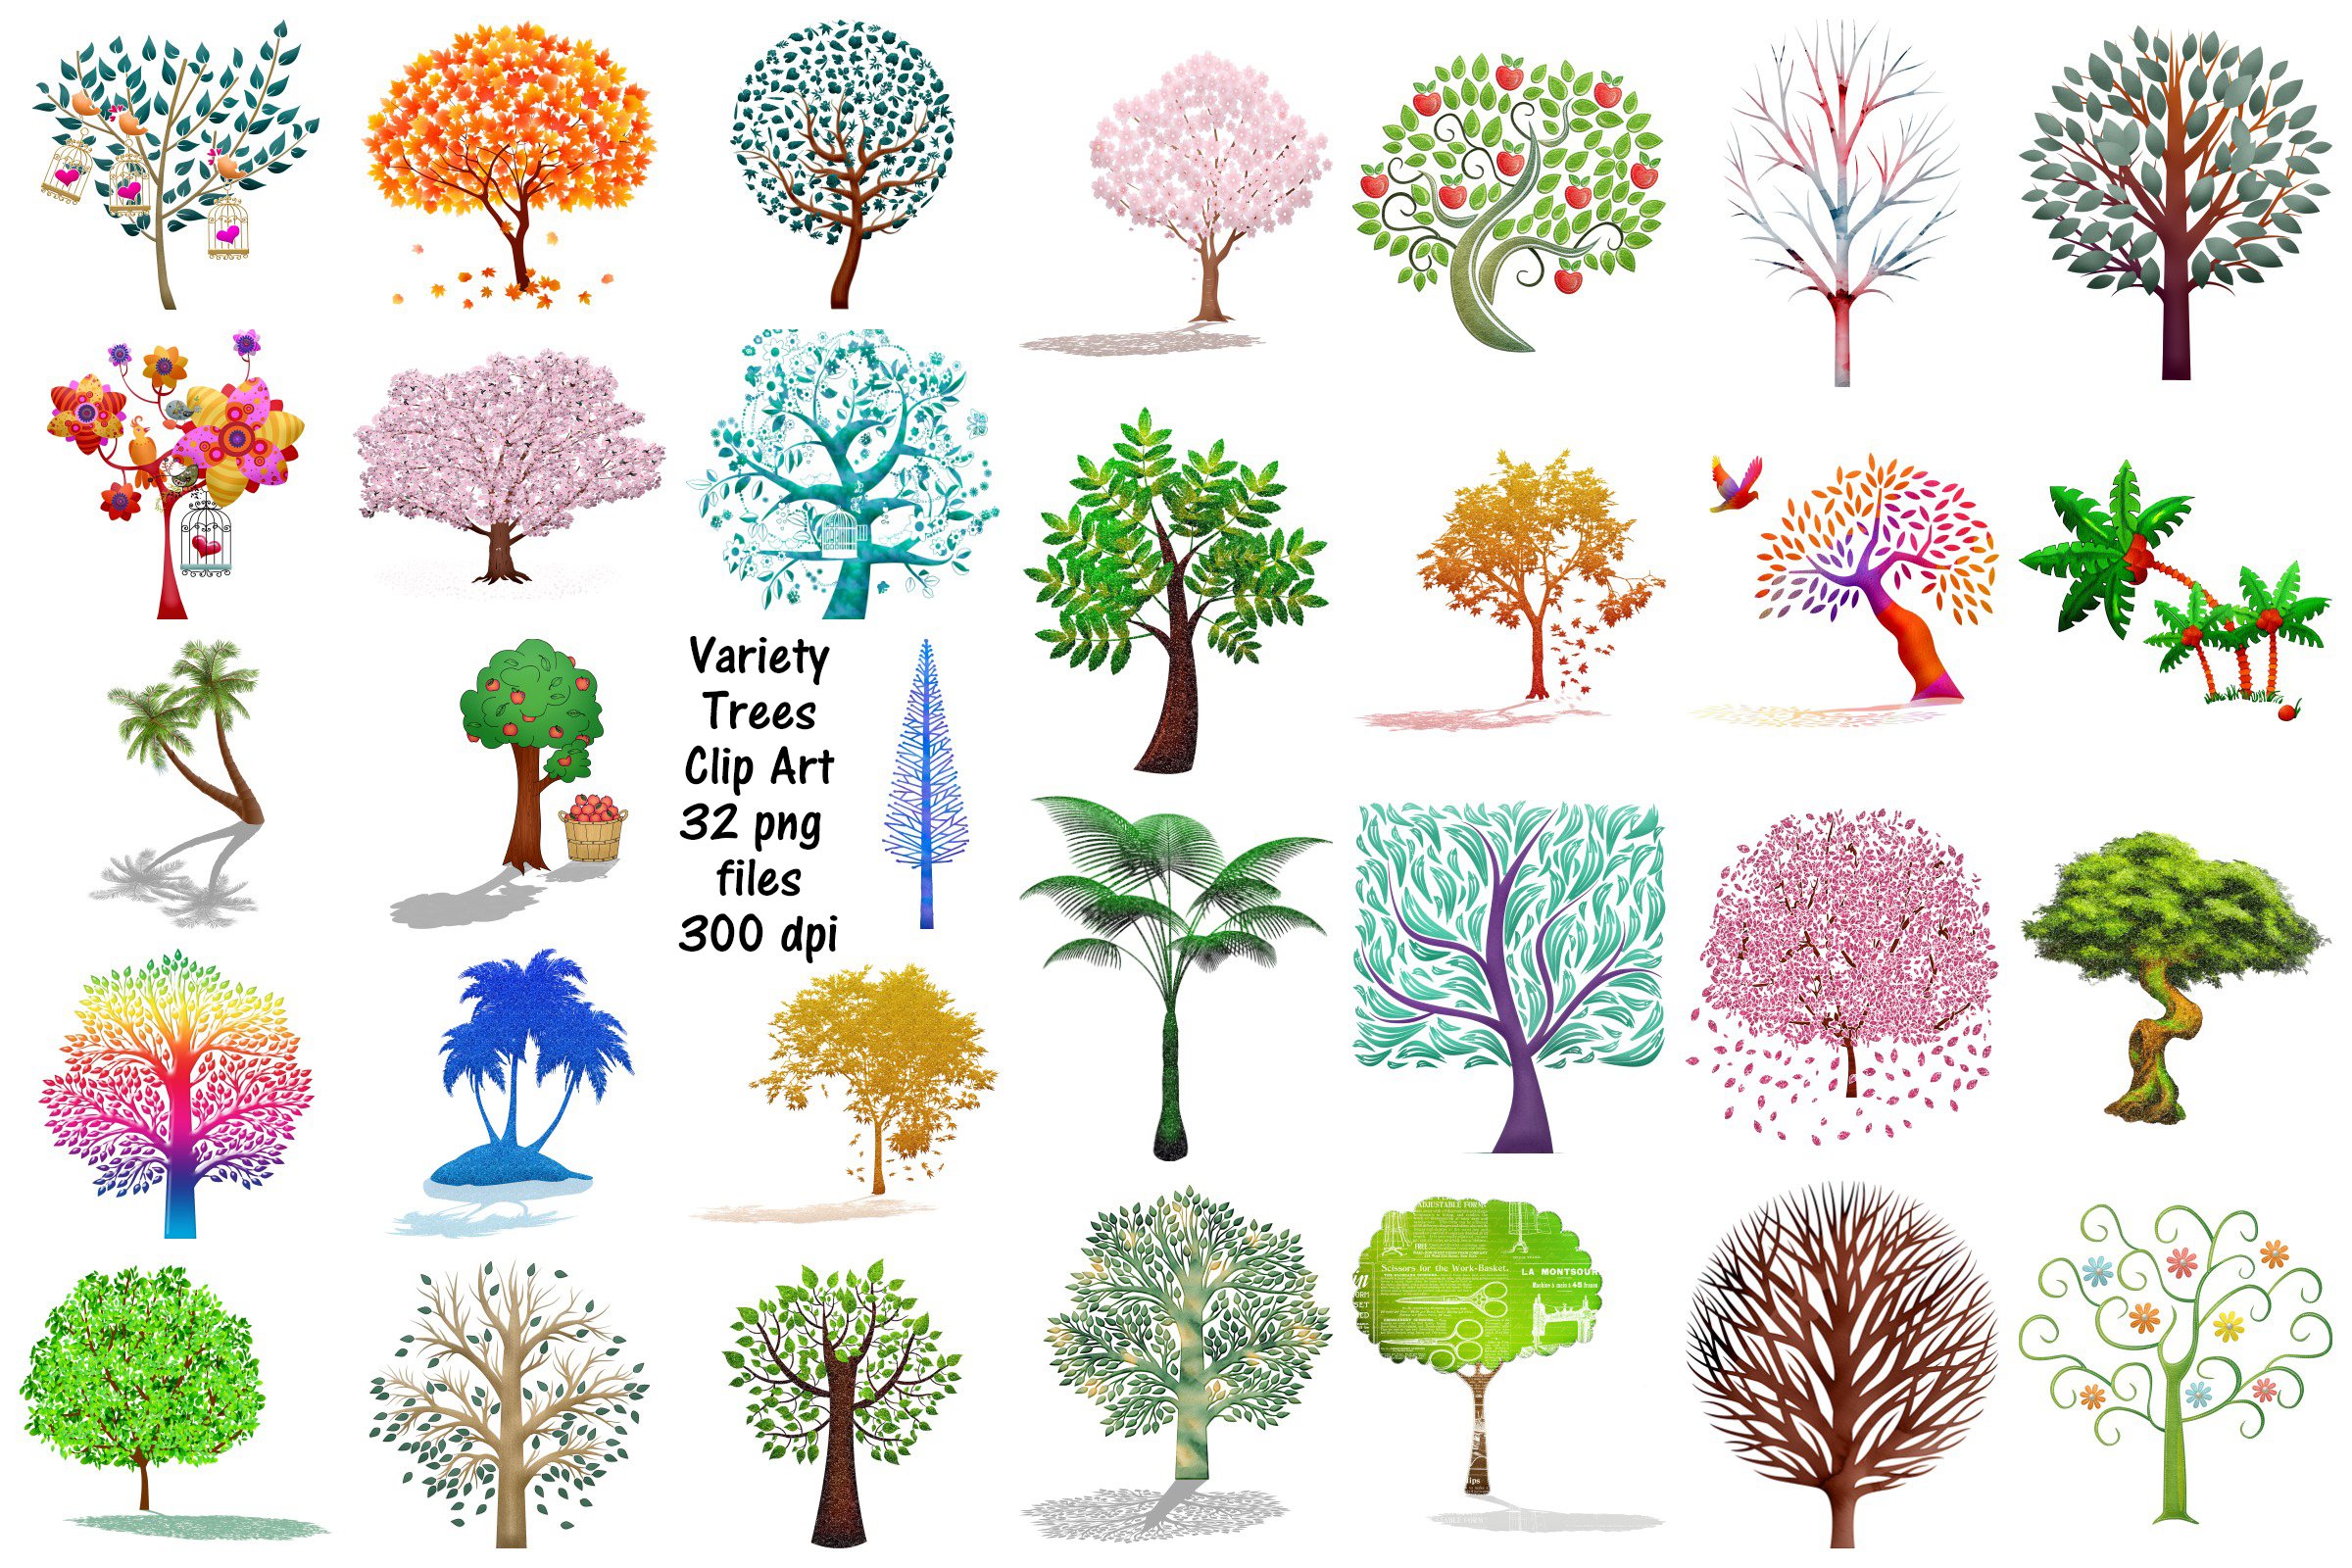 Tree Variety ClipArt(Watercolor,Etc) cover image.